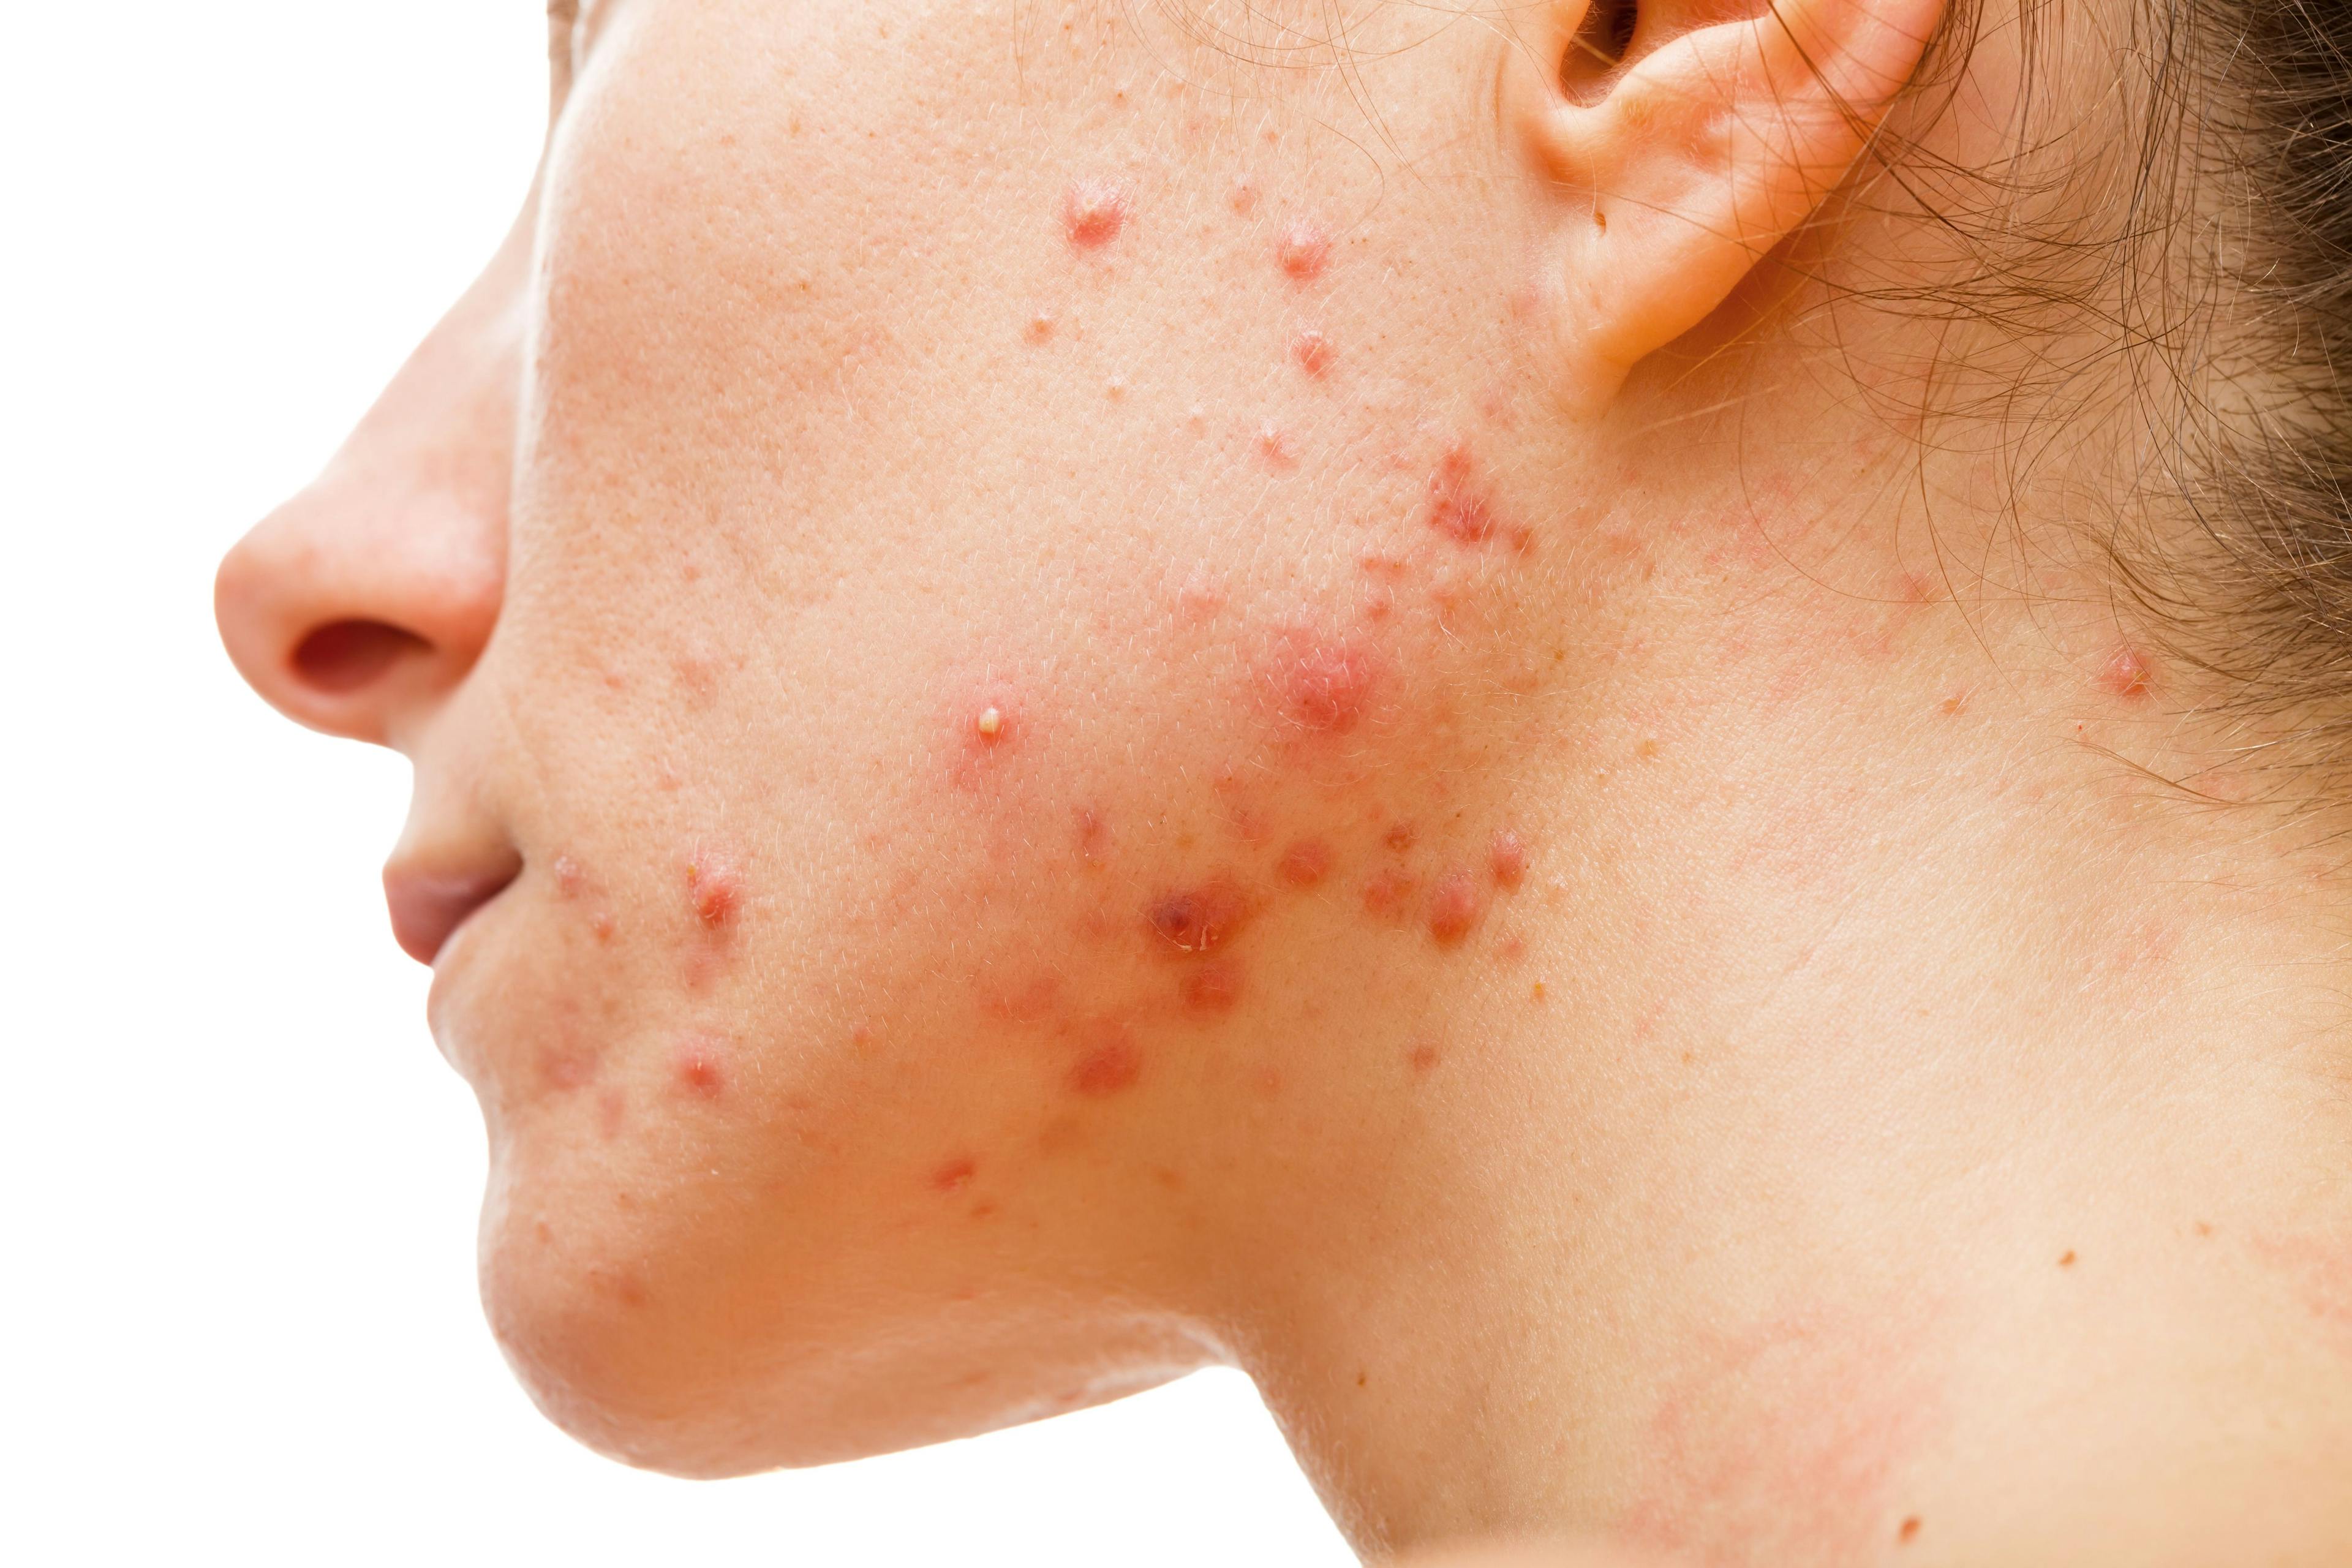 POLL: What is your preferred acne treatment?